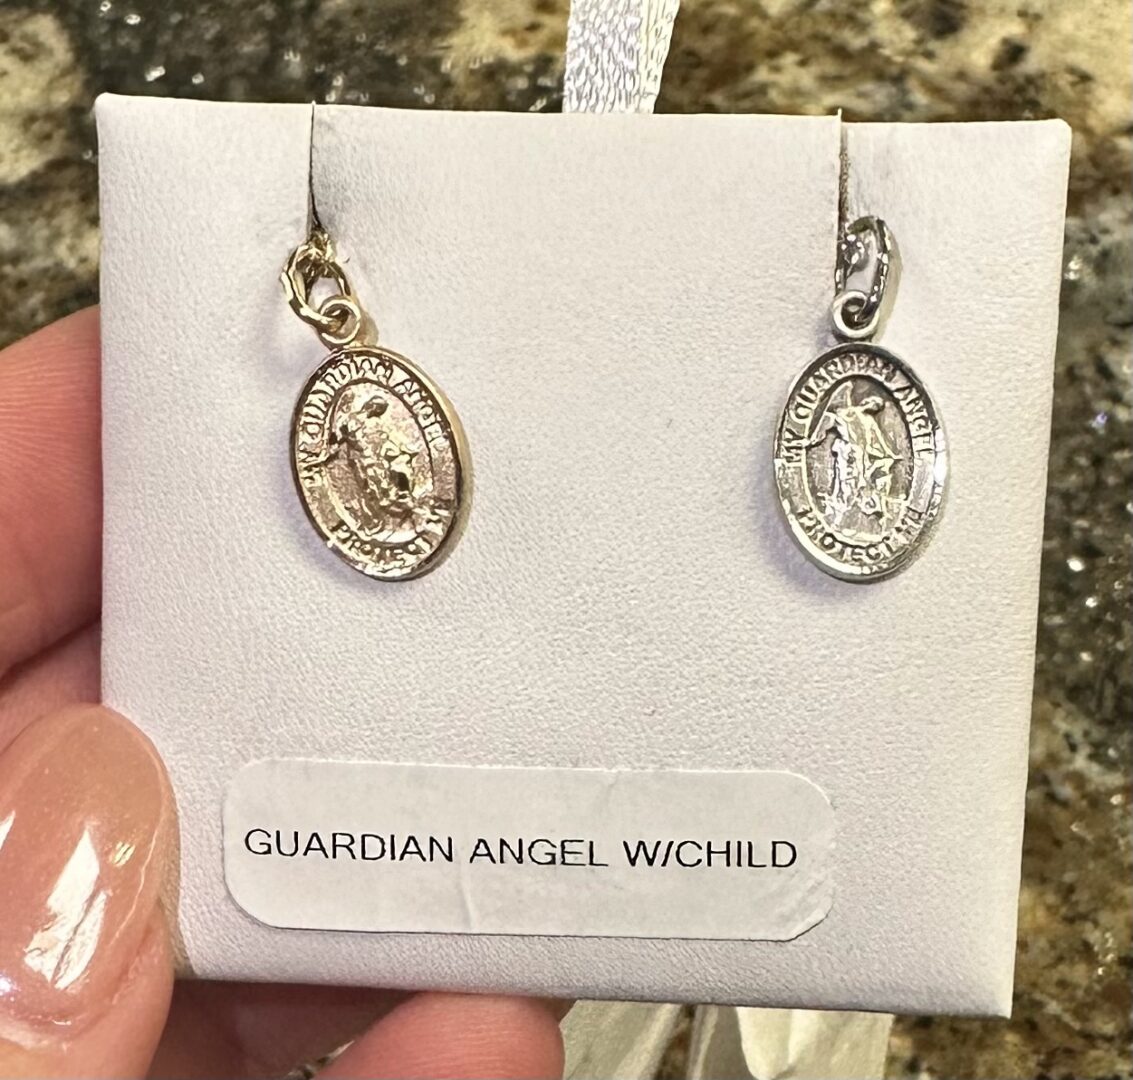 Guardian angel with child necklace earrings.